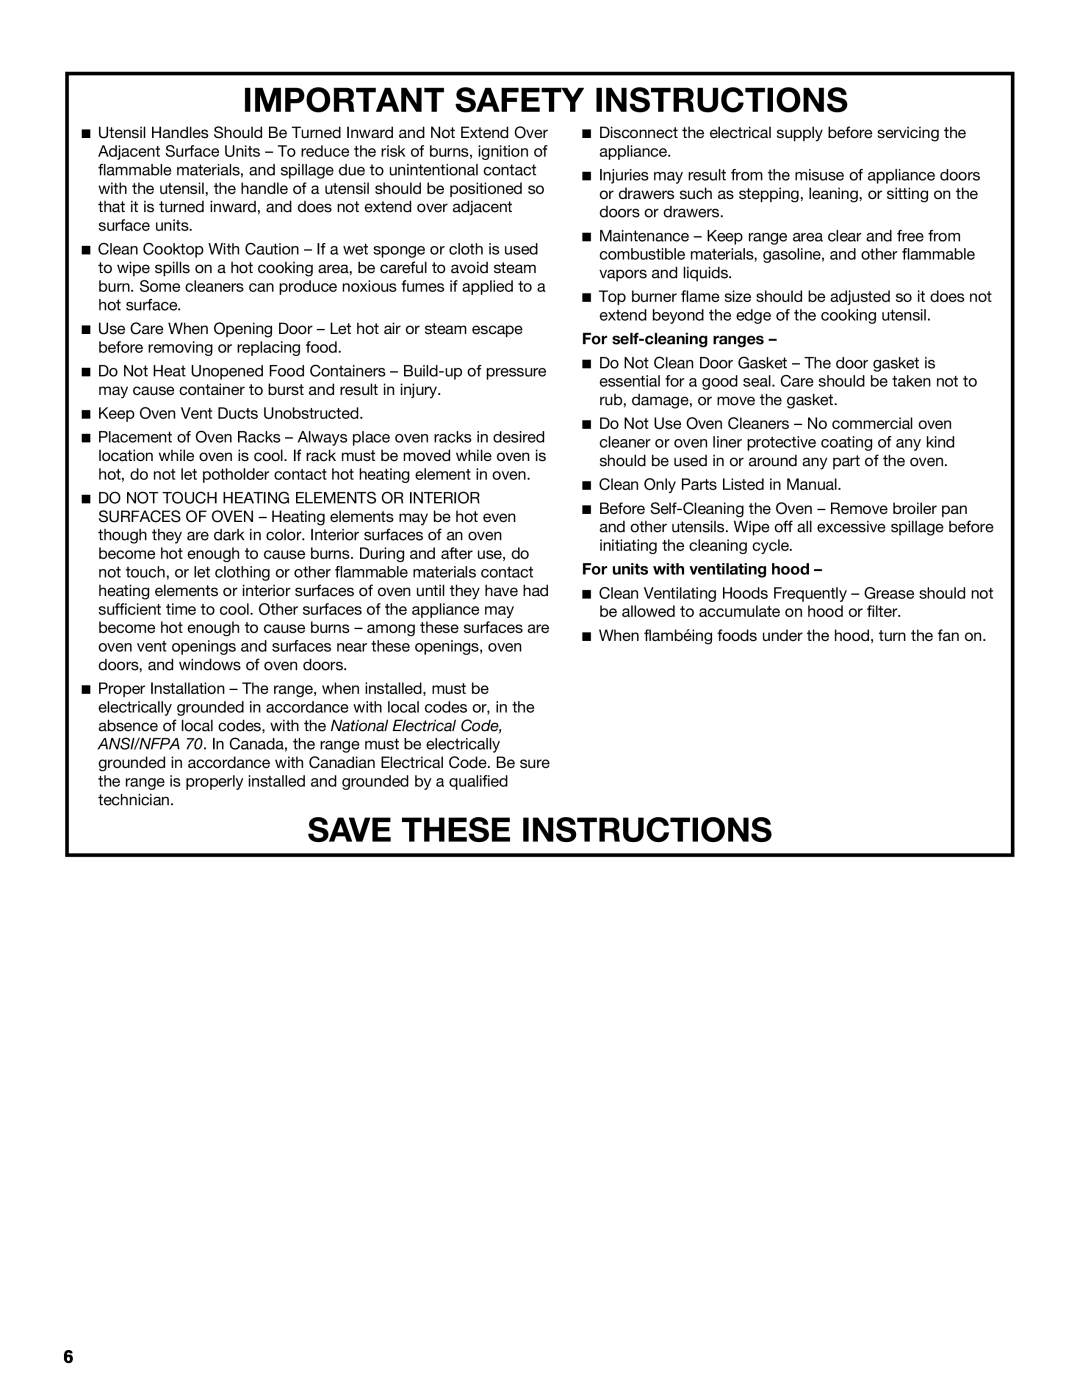 KitchenAid KDRS463, KDRS467, KDRS483 manual Important Safety Instructions, Save These Instructions, For self-cleaning ranges 